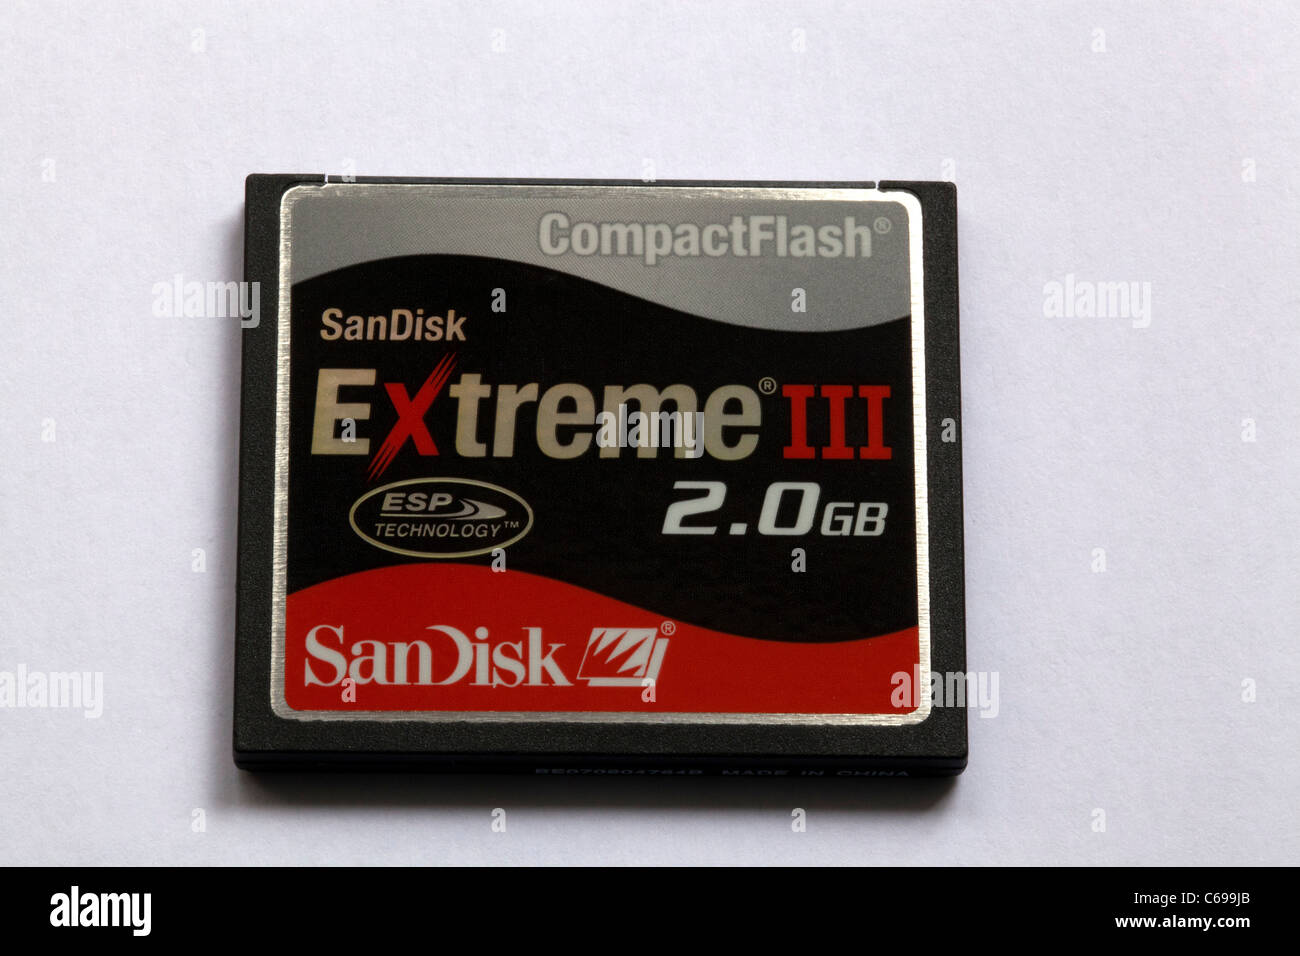 Compact Flash Memory Cards - Best CompactFlash Card (2GB, 4GB)